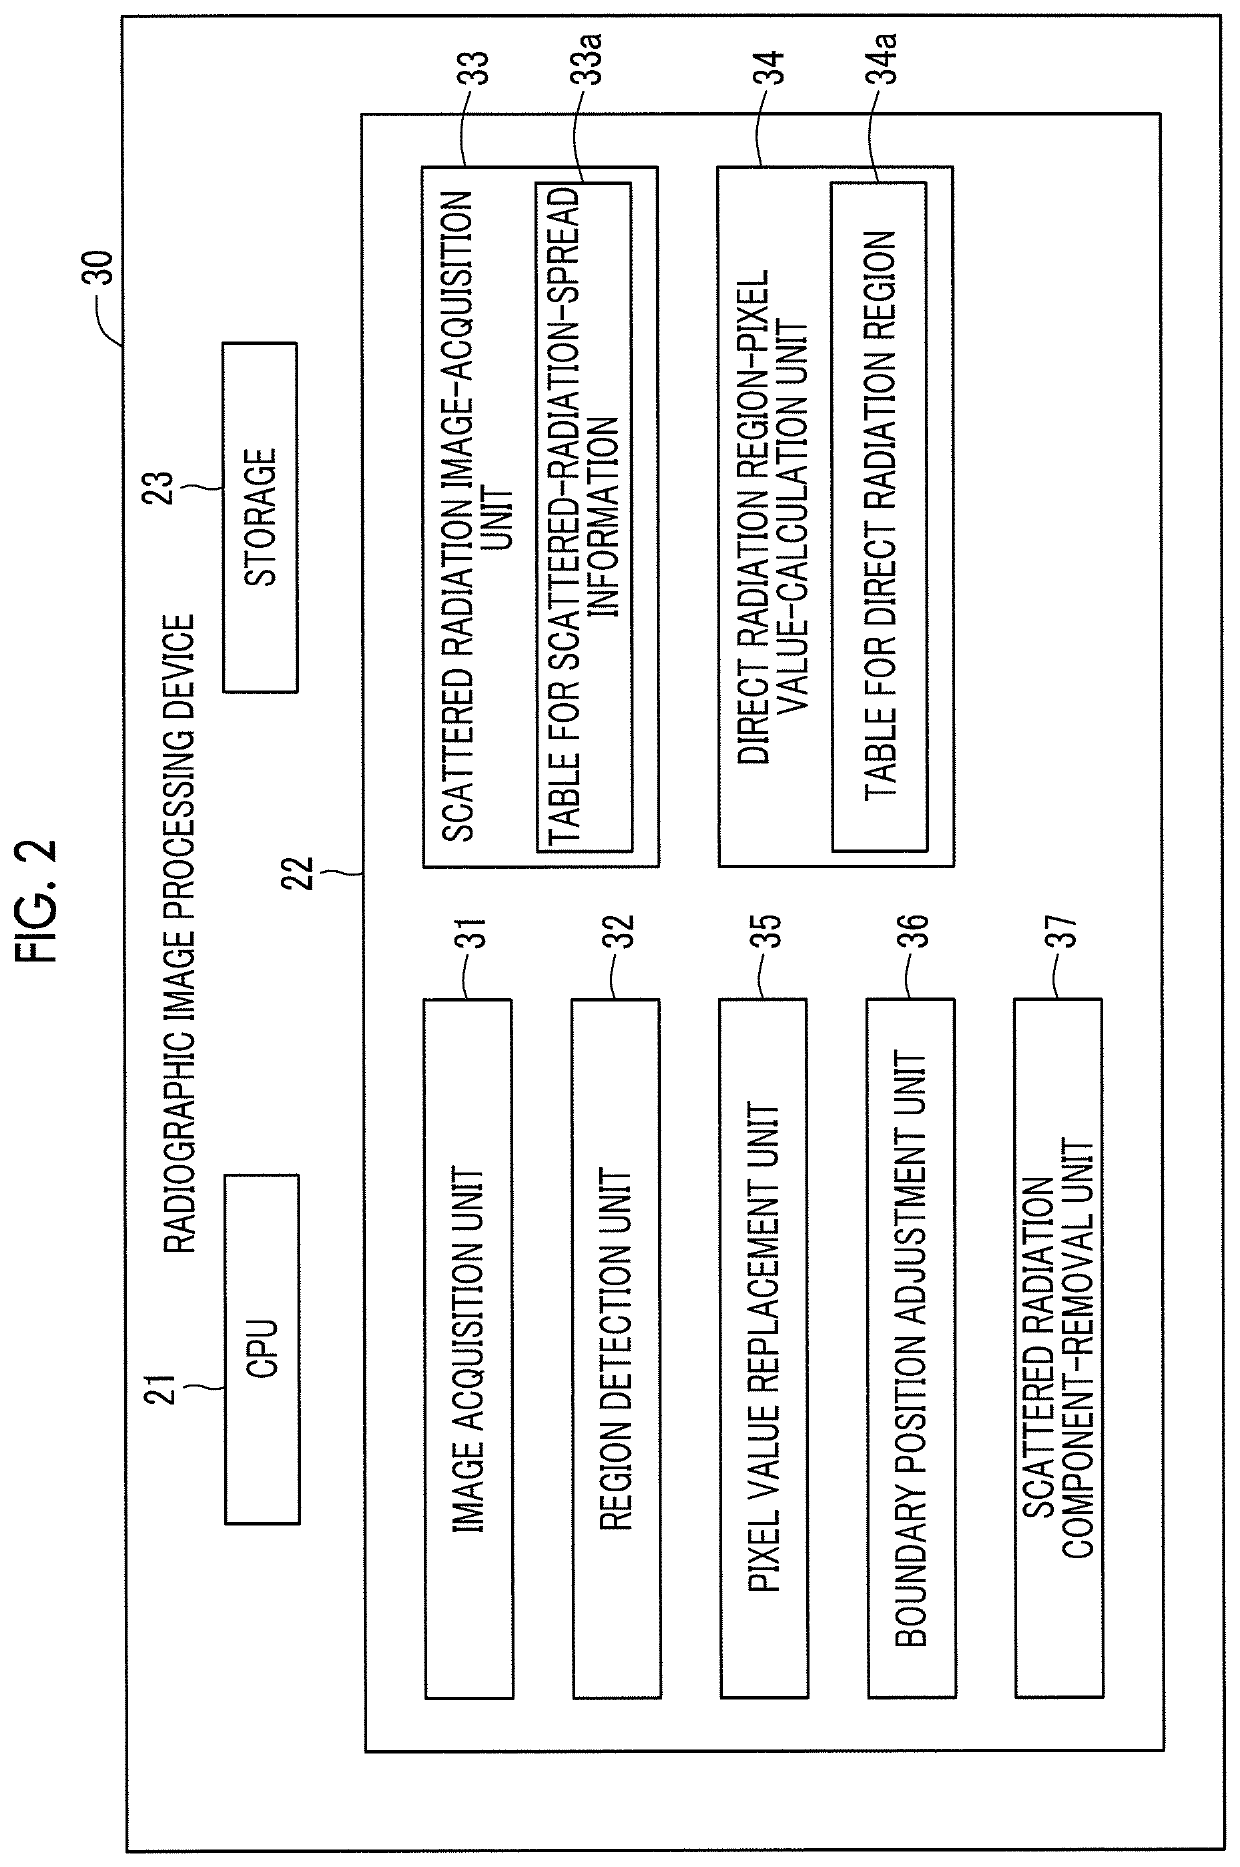 Radiographic image processing device, method of operating radiographic image processing device, and radiographic image processing program